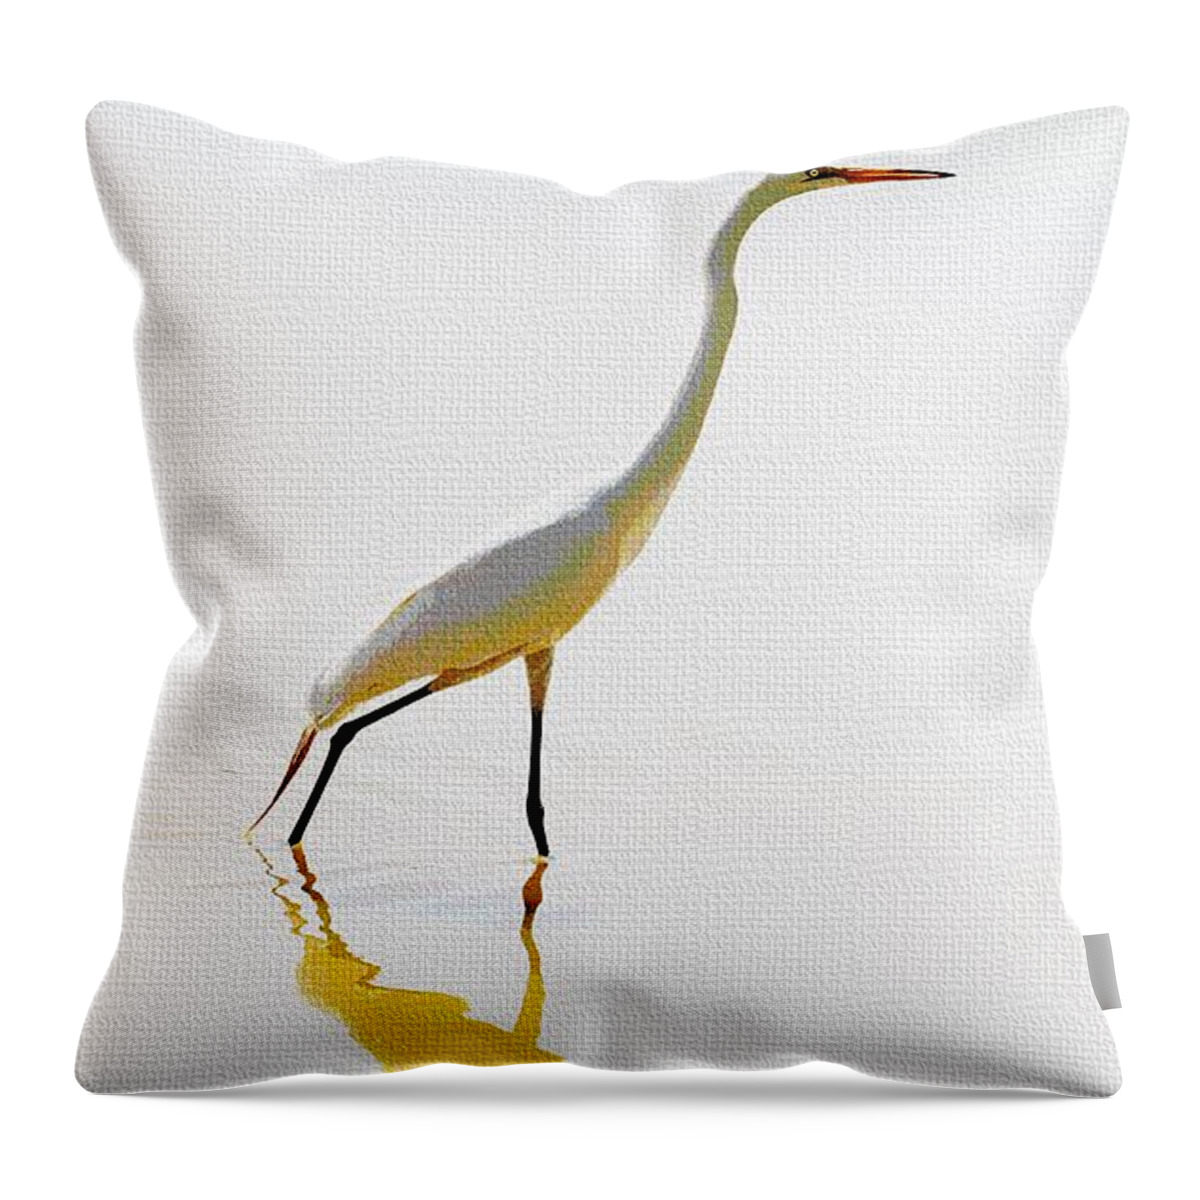 The Greater Egret With Style Throw Pillow featuring the photograph The Greater Egret With Style by Tom Janca